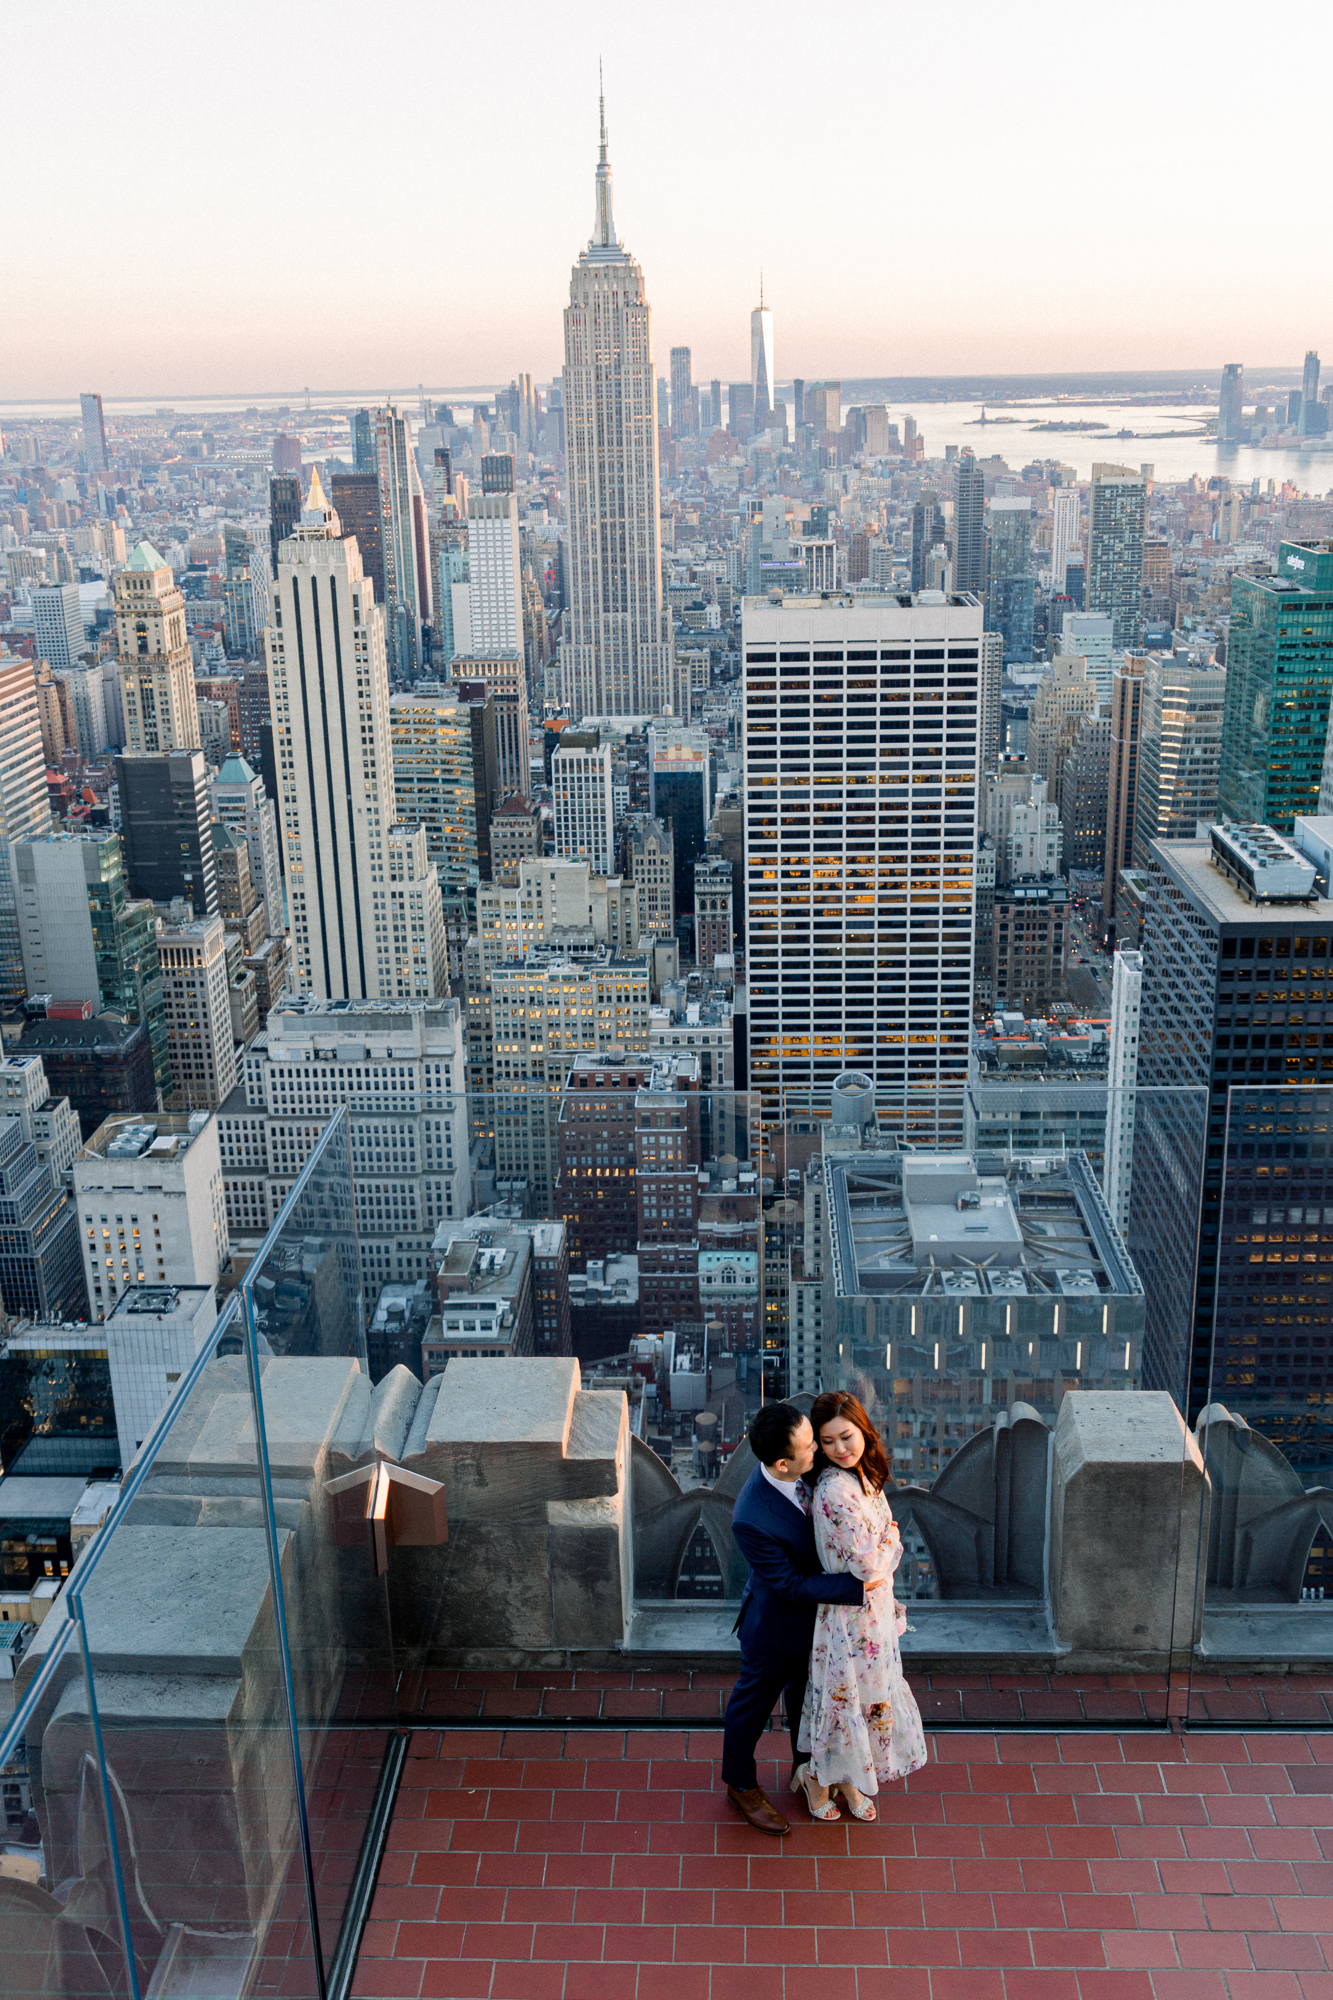 Awe-inspiring Top of the Rock Engagement Photography at Sunset in NYC